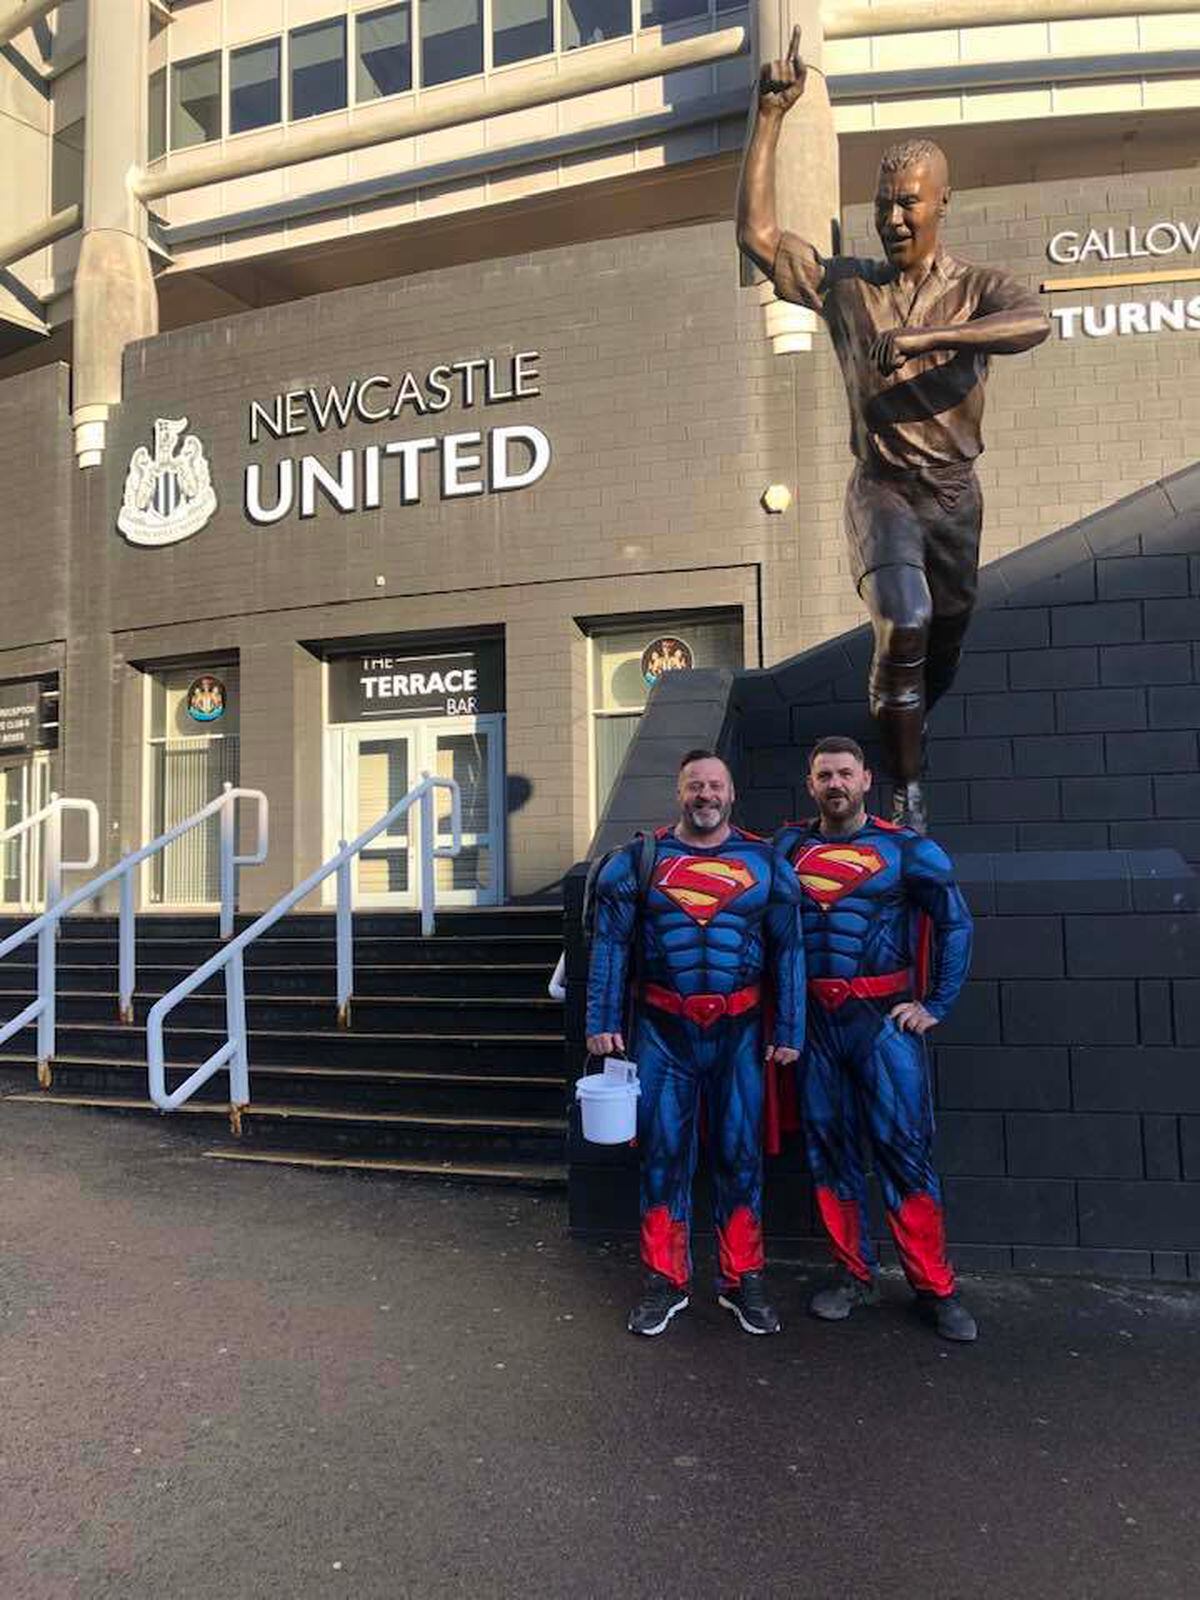 The pair began at St James Park, Newcastle